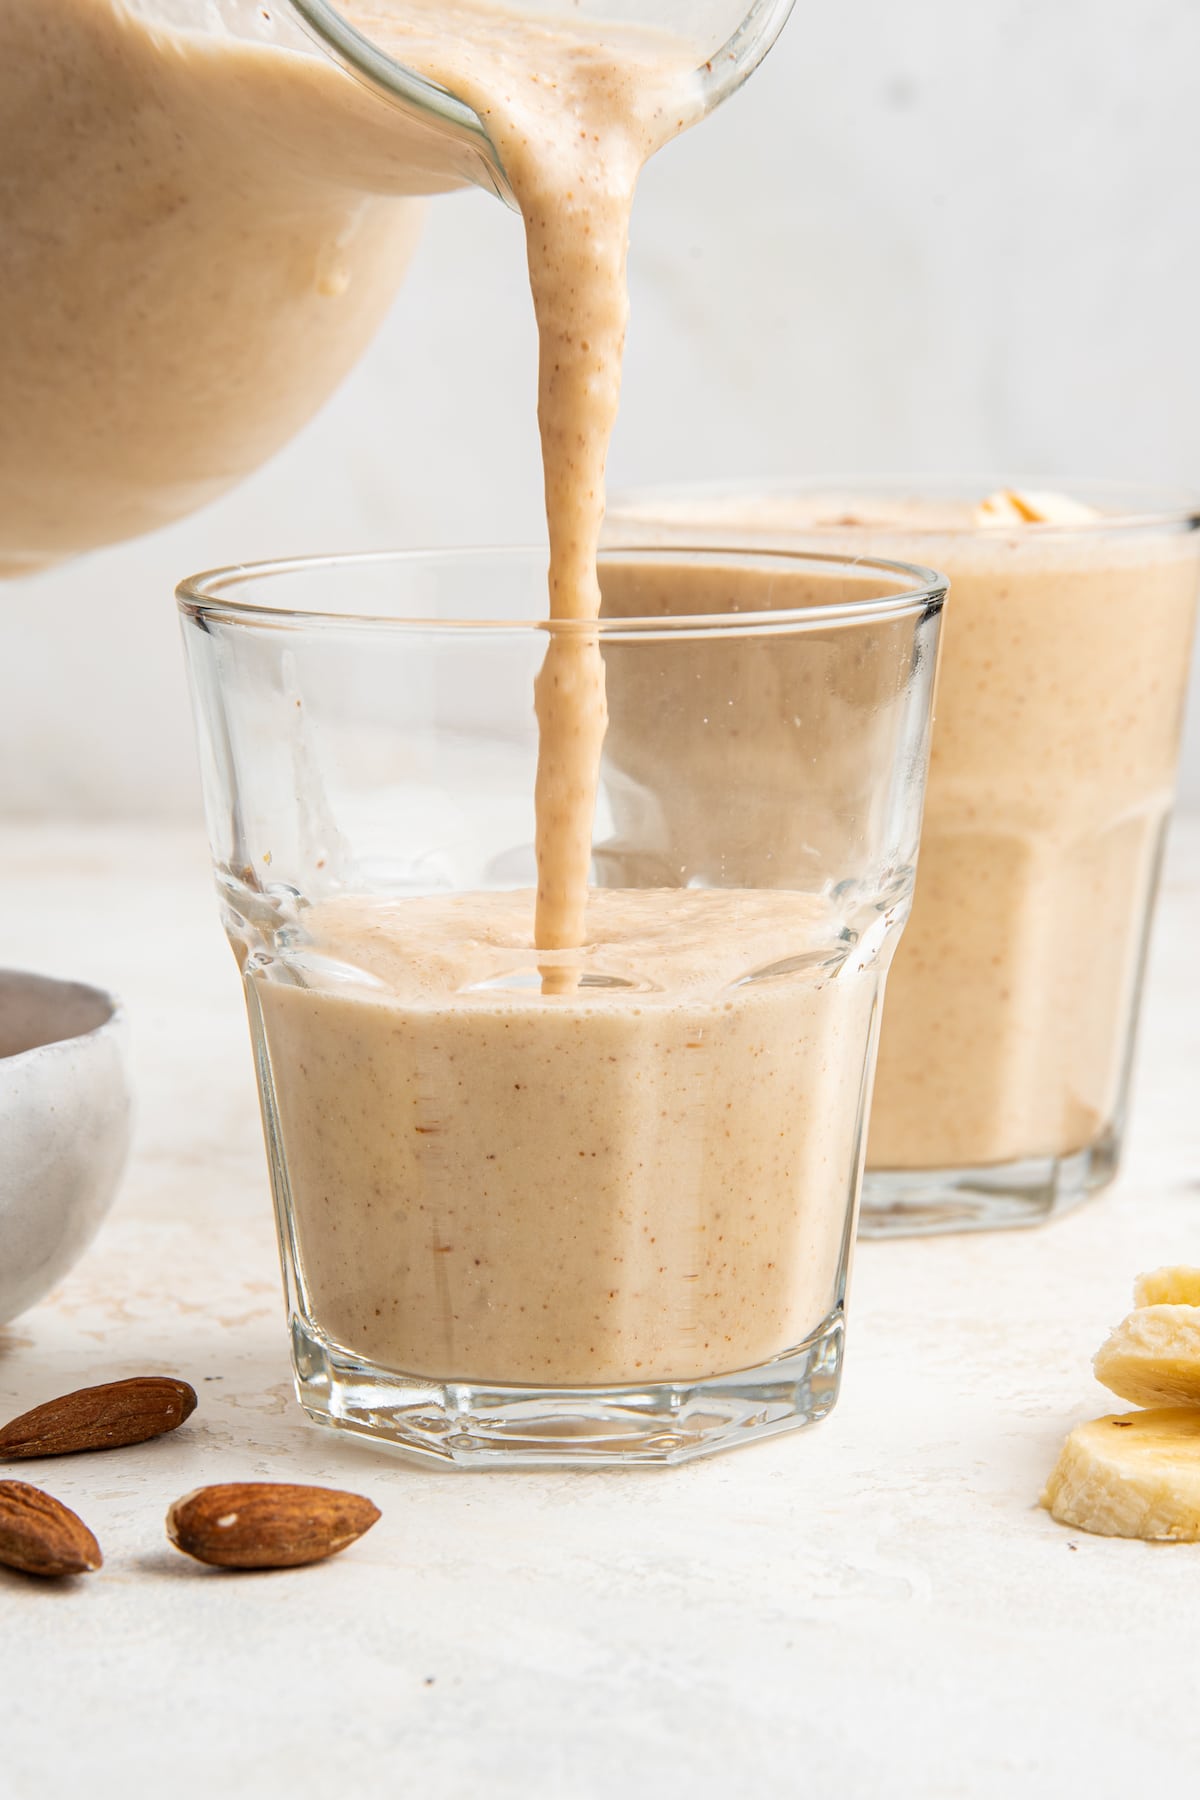 Banana almond butter smoothie being poured into glass cup.